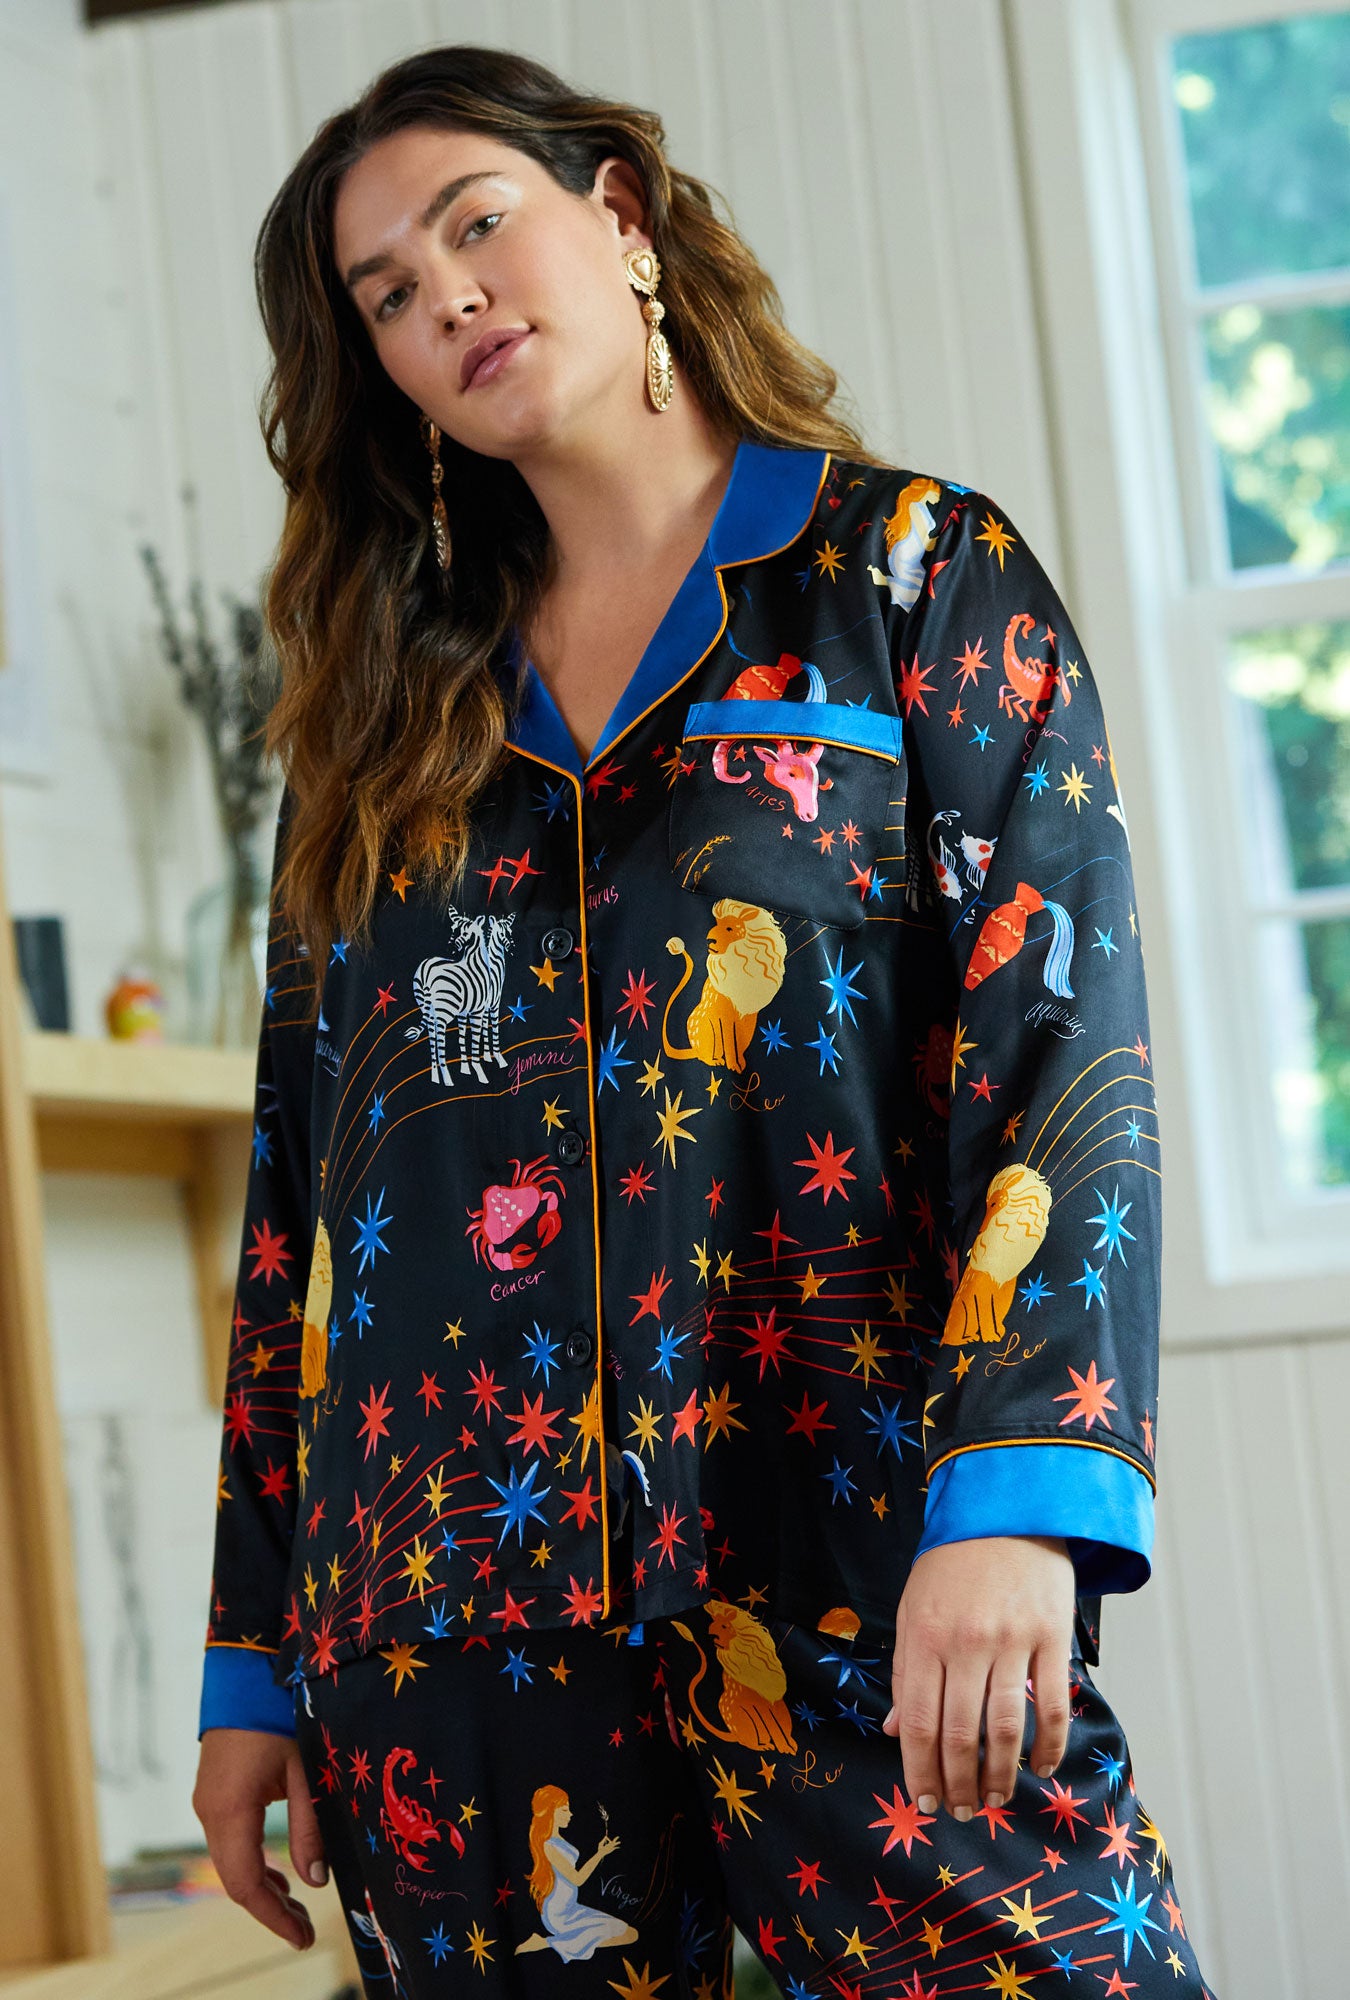 A lady wearing black Long Sleeve Classic Washable Silk PJ Set with Celestial Dreams print